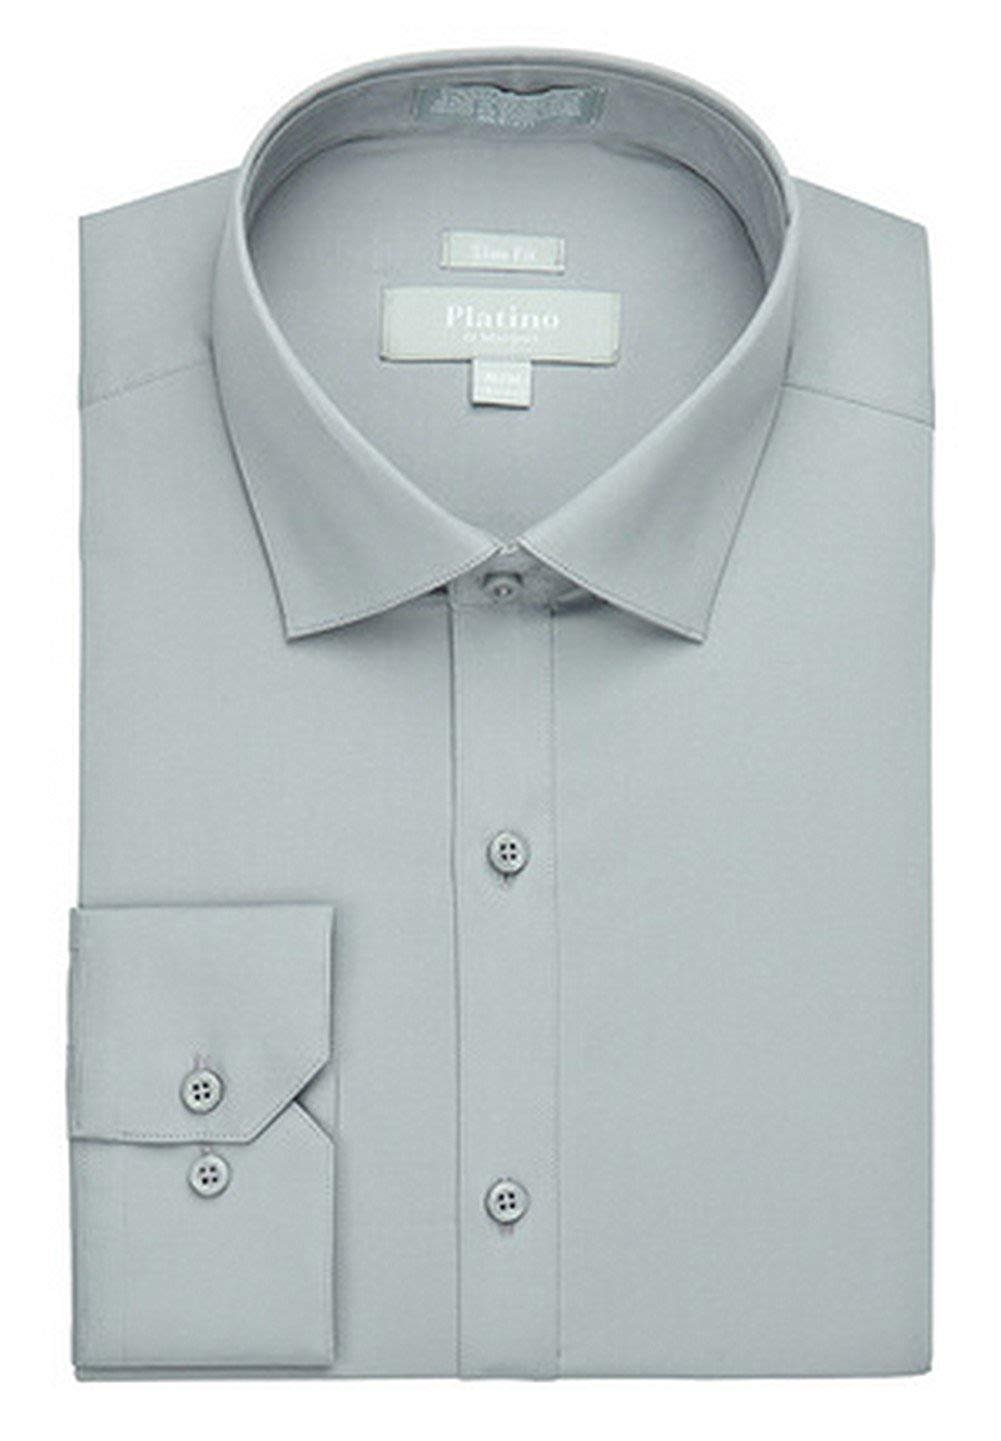 Marquis Platino Men's Slim Fit Cotton Stretch Long Sleeve Dress Shirt - CLEARANCE - FINAL SALE